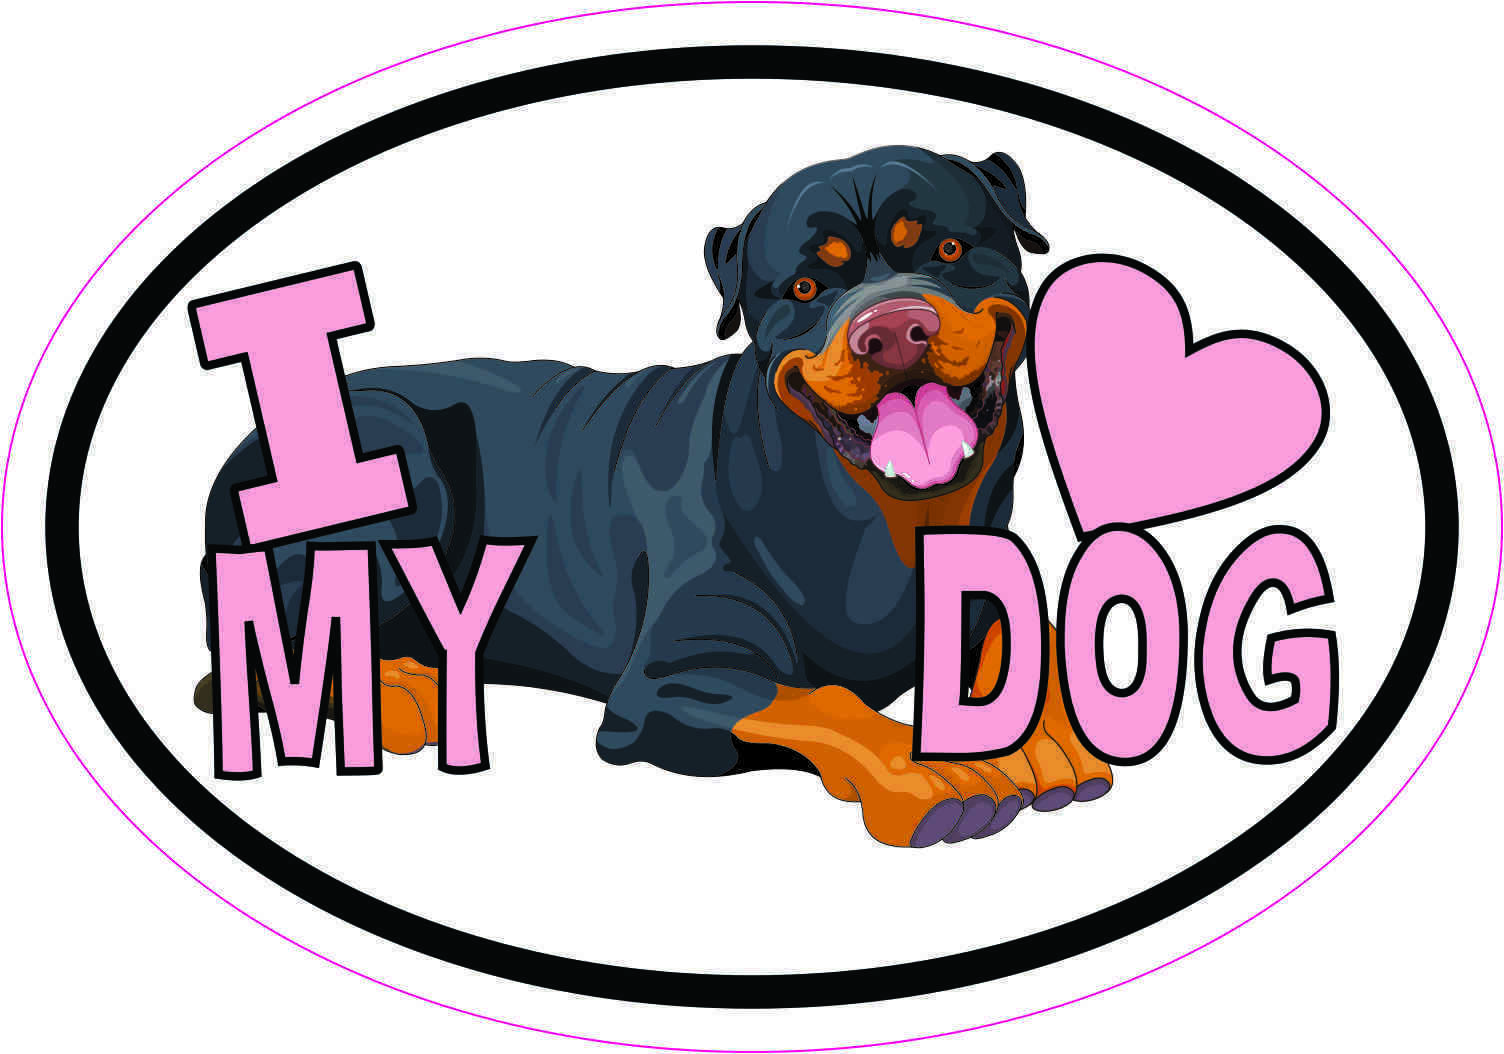 5in x 3.5in Rottweiler Oval I Love My Dog Sticker Car Truck Vehicle Bumper Decal